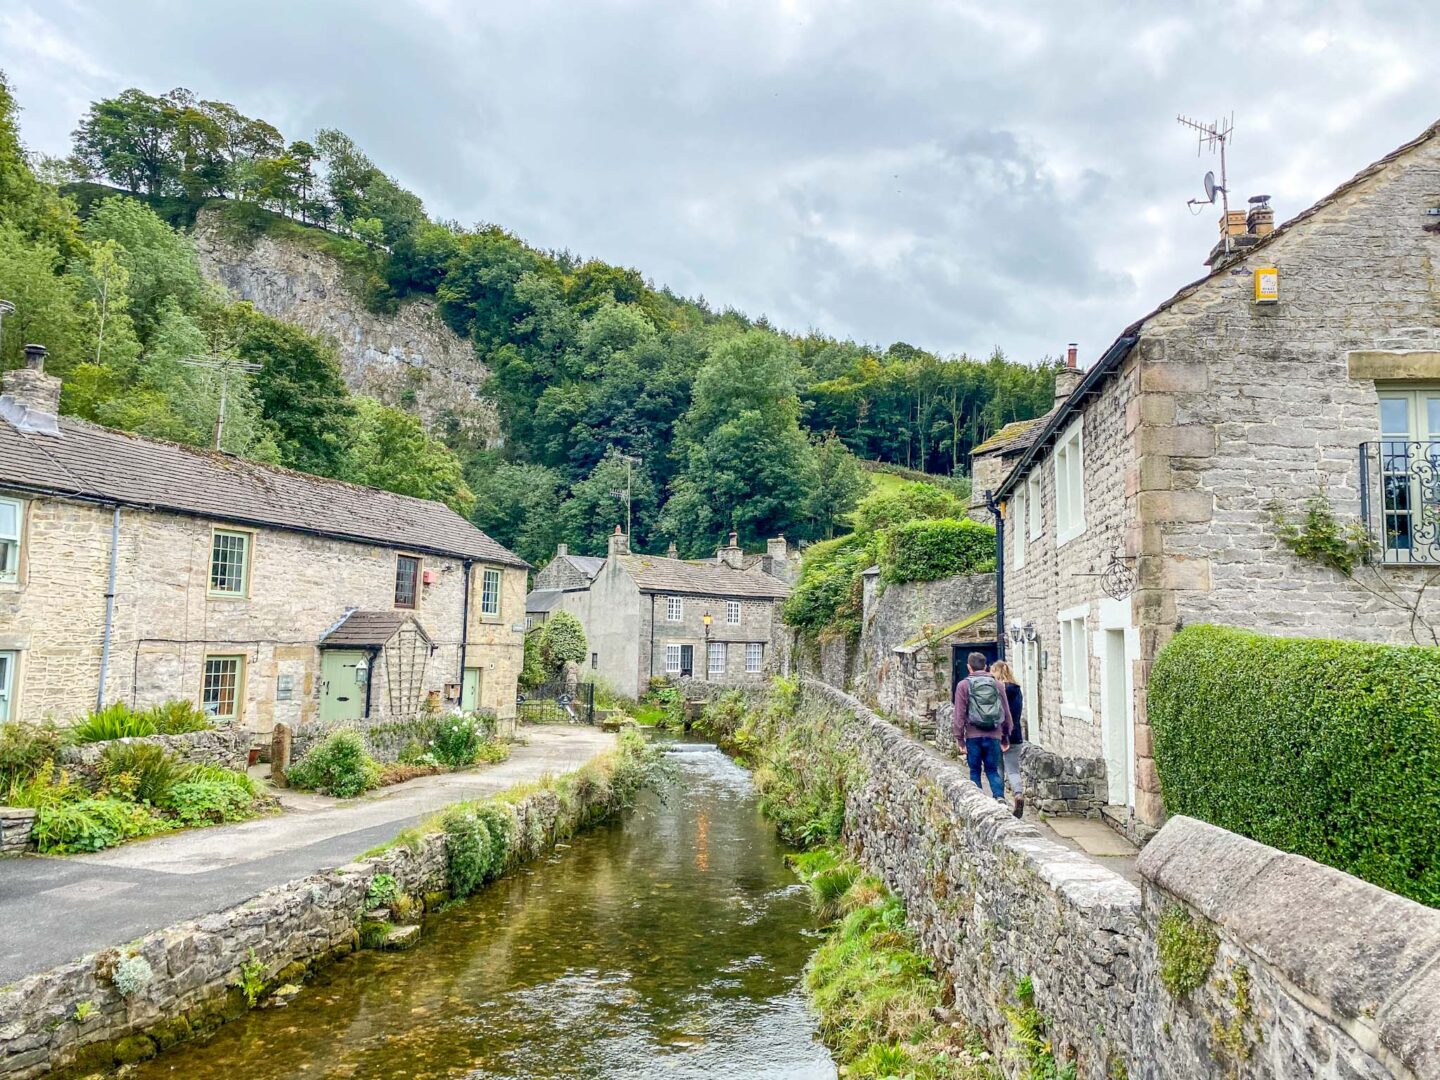 Peak District Day Out IDEAS – 15+ Ways To Have a Peak District Day Trip!